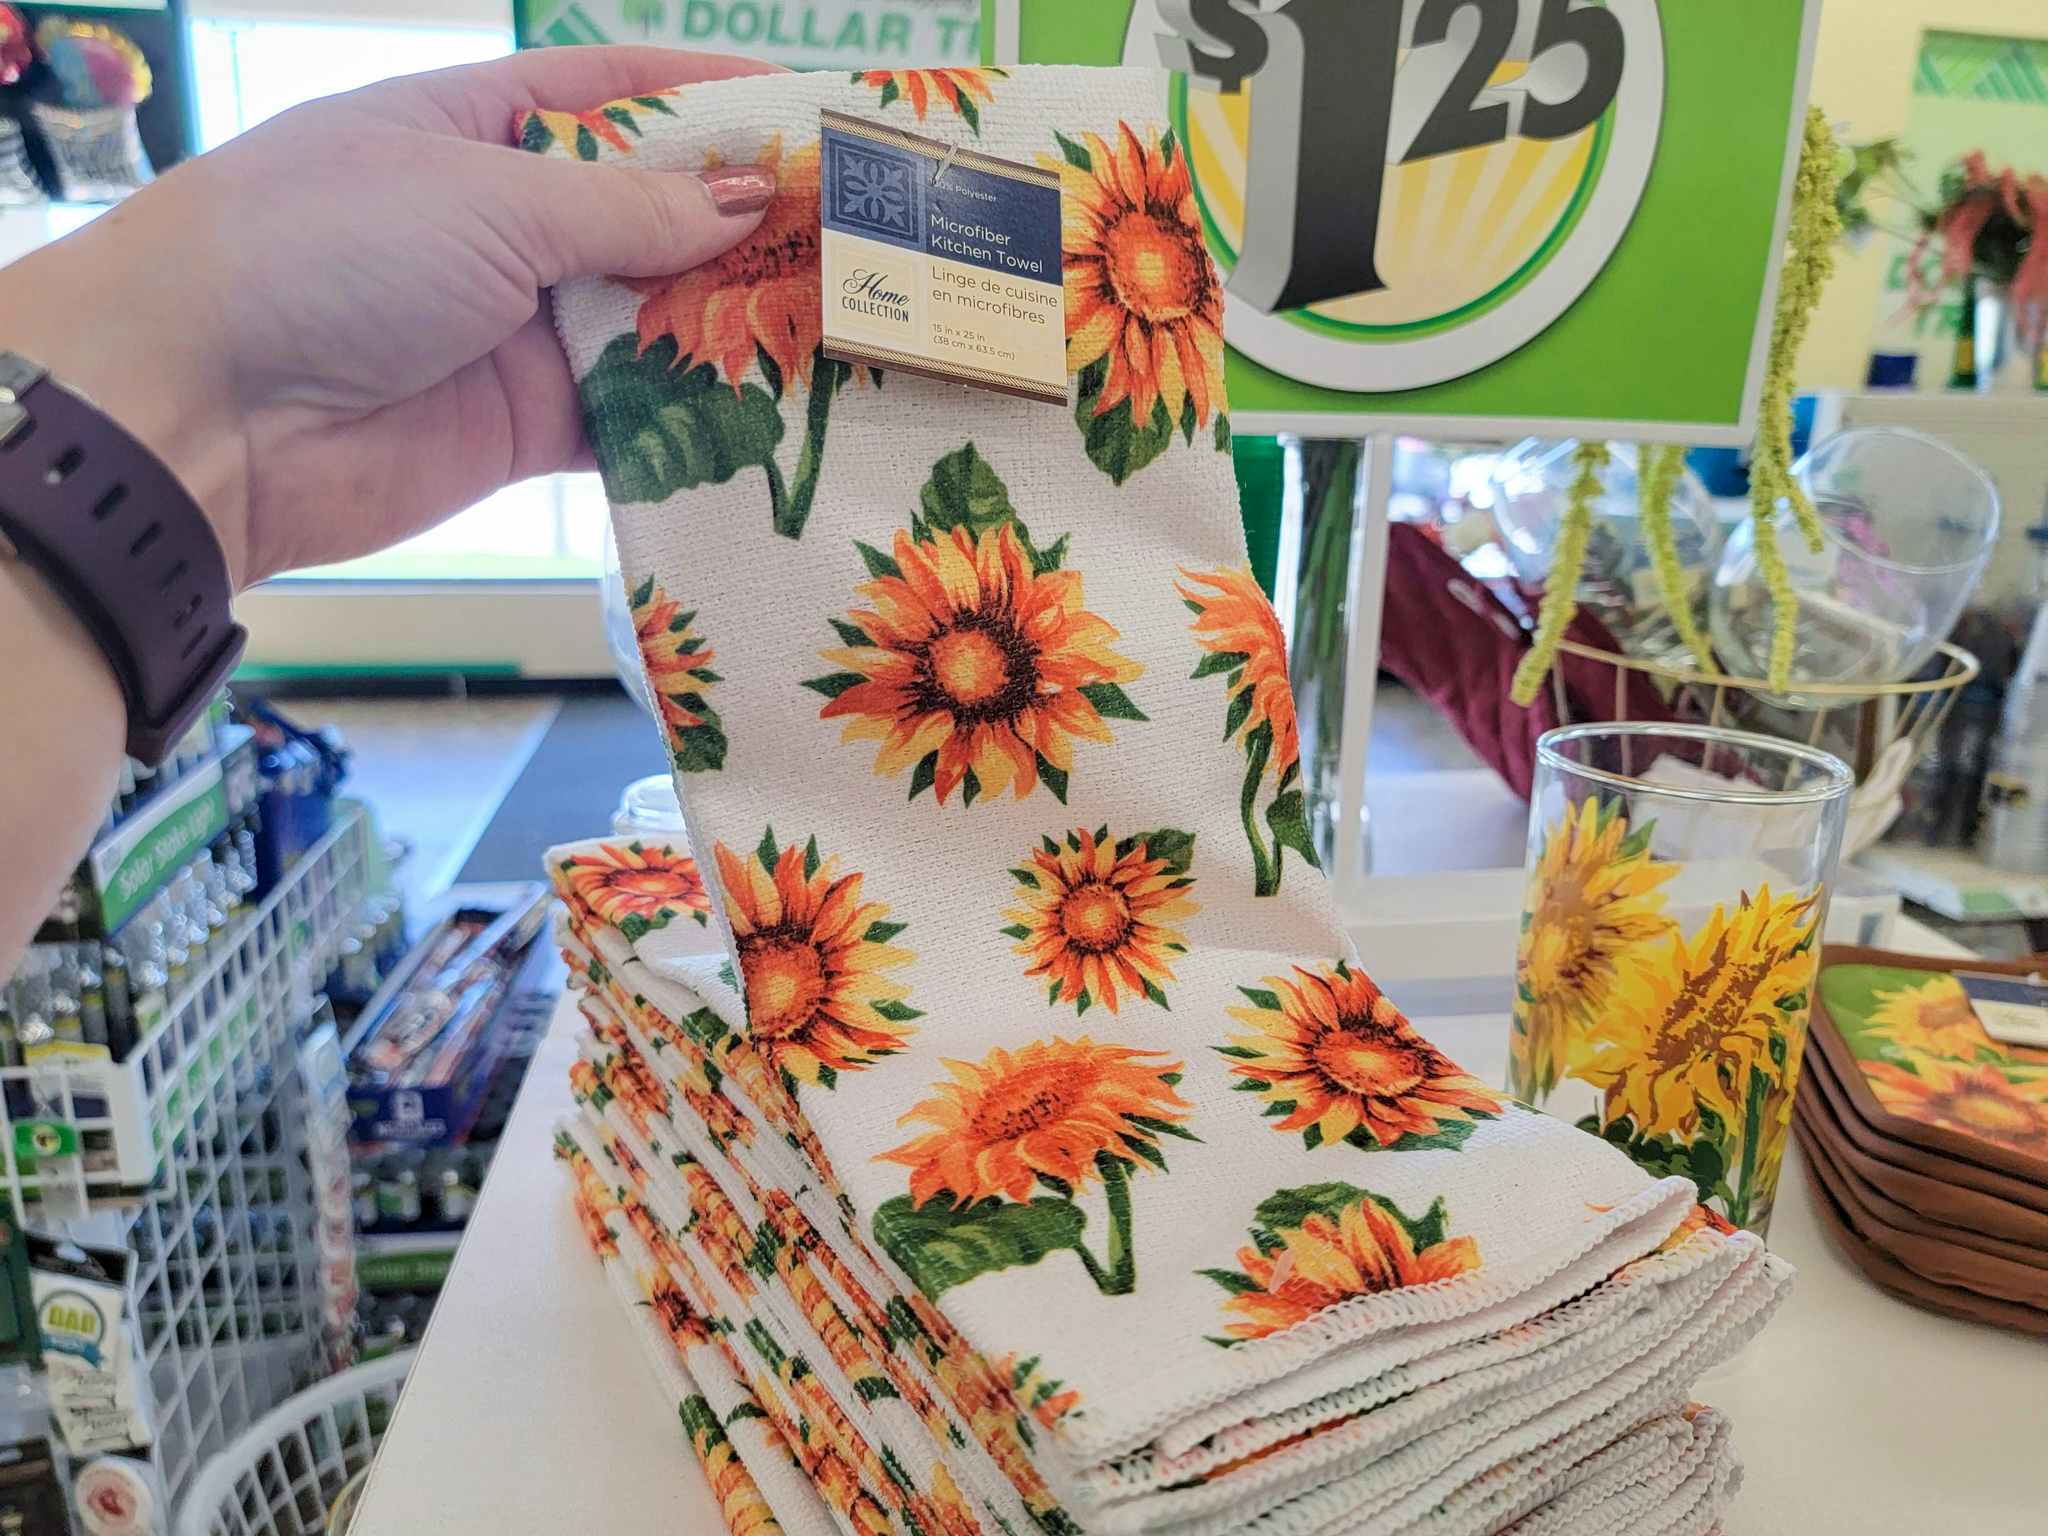 hand holding up a kitchen towel with sunflowers on it